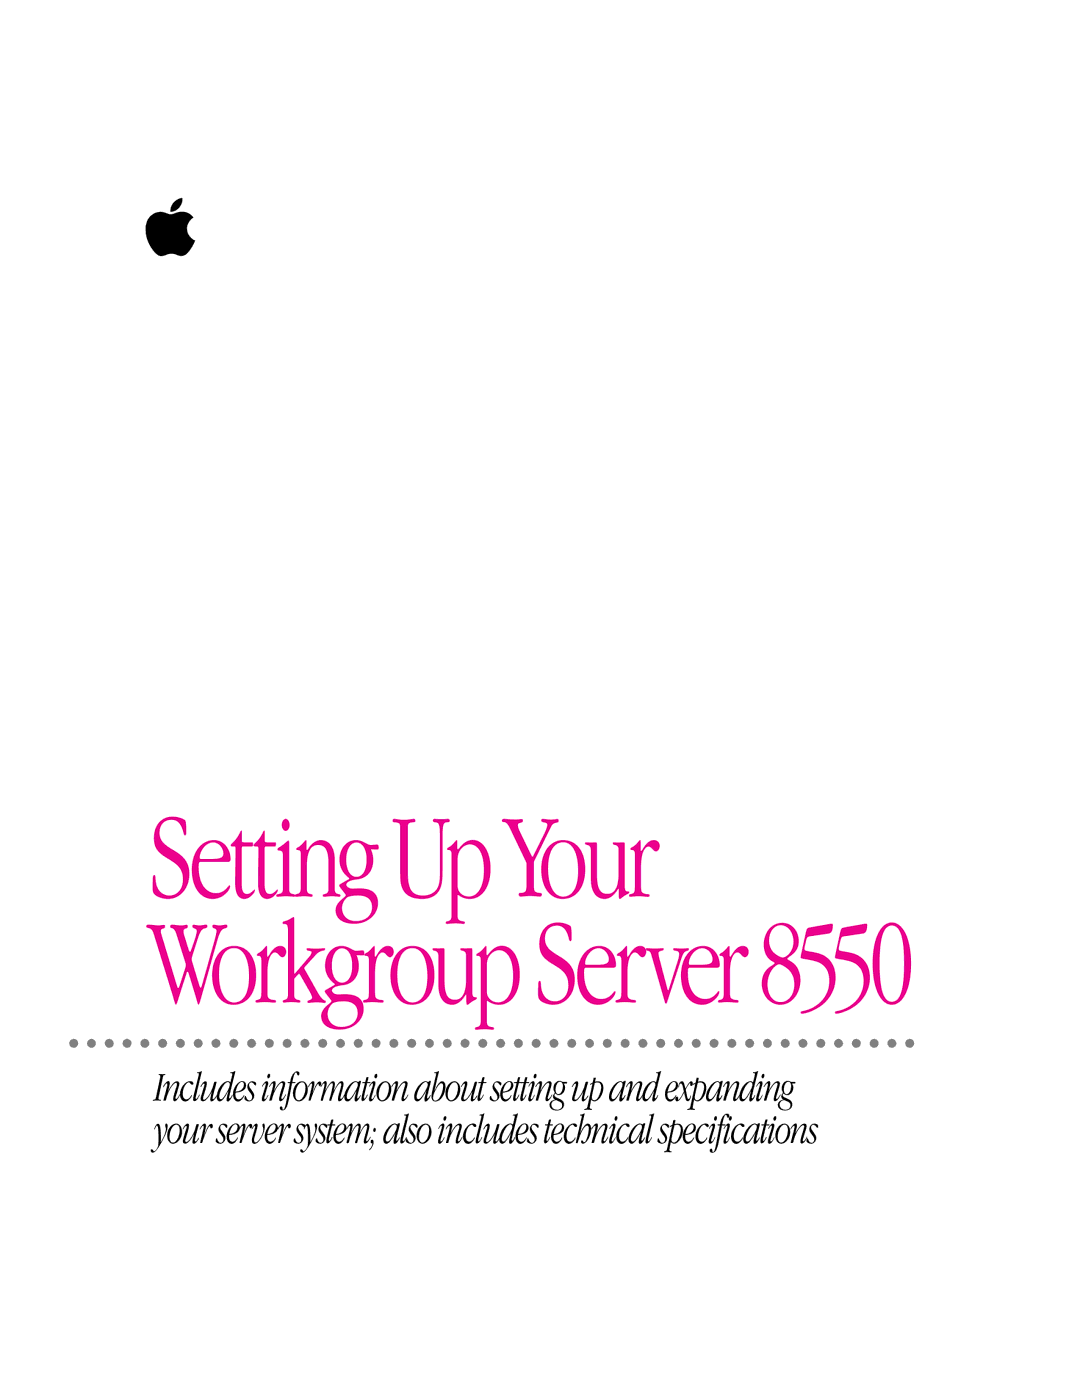 Apple 8550 technical specifications Setting Up Your Workgroup Server 